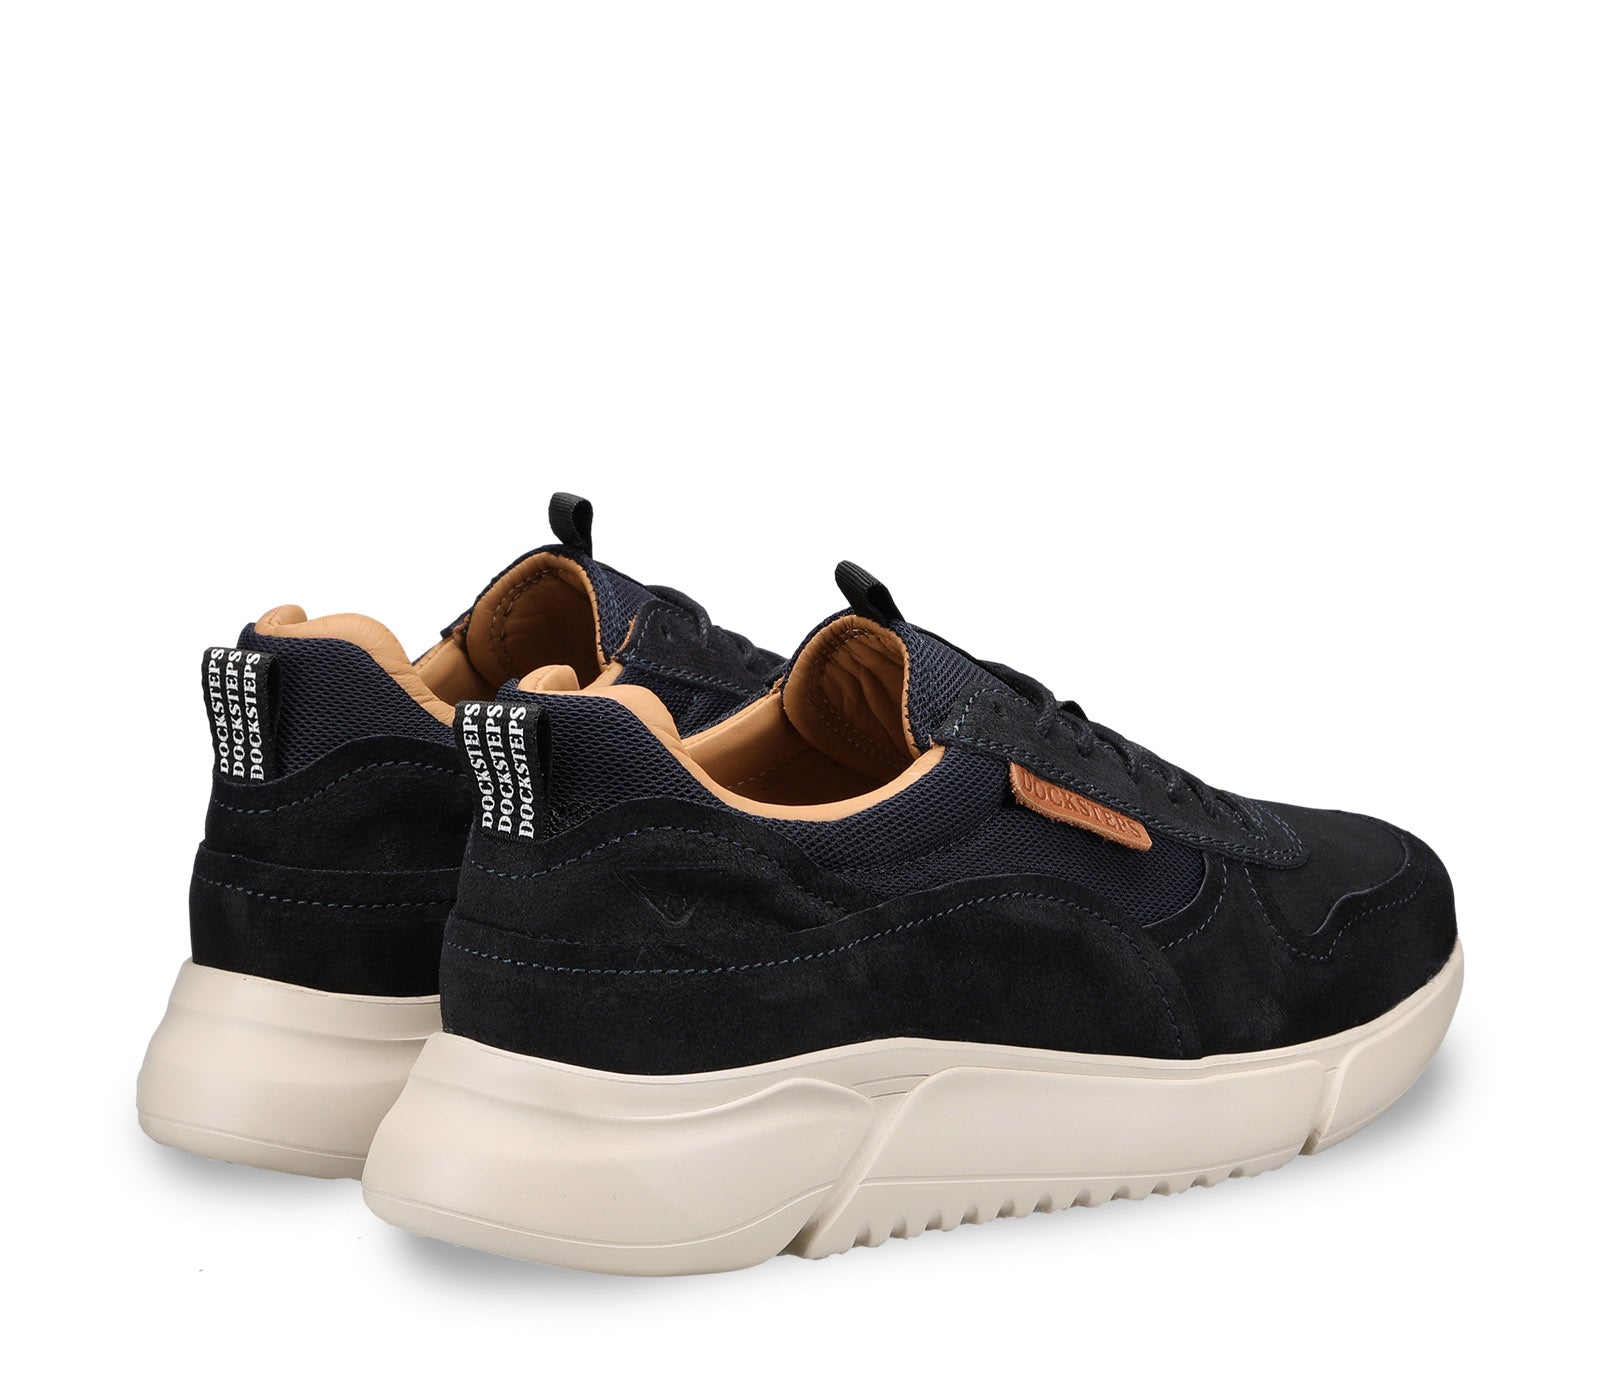 Black Men's Sneakers with White Rubber Sole